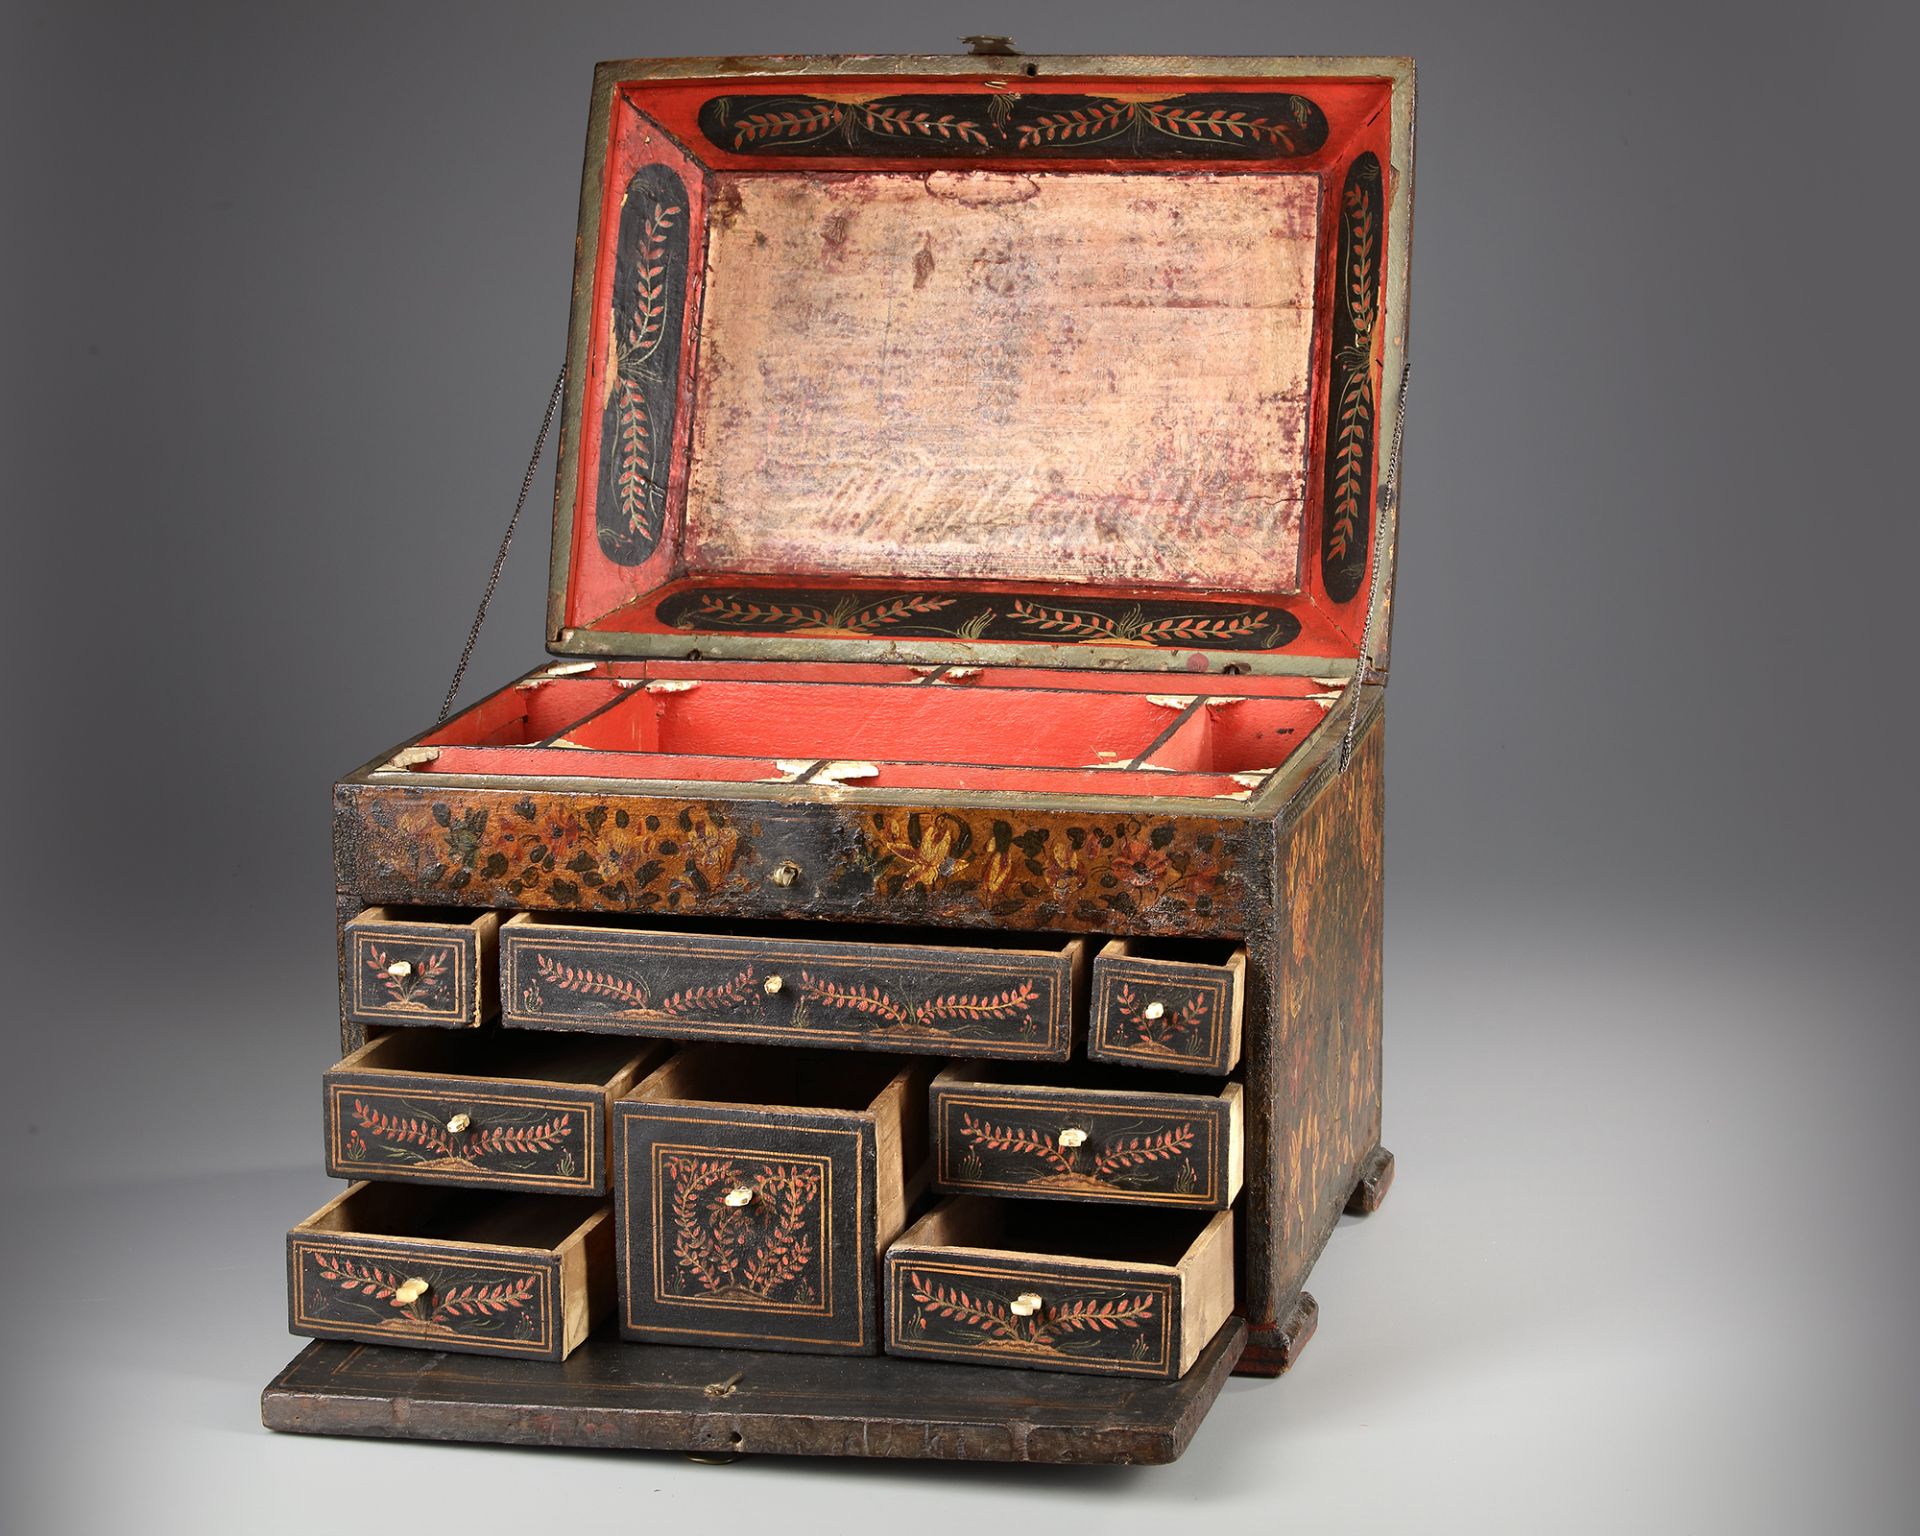 A PERSIAN WOODEN CHEST WITH DRAWERS - Image 4 of 5